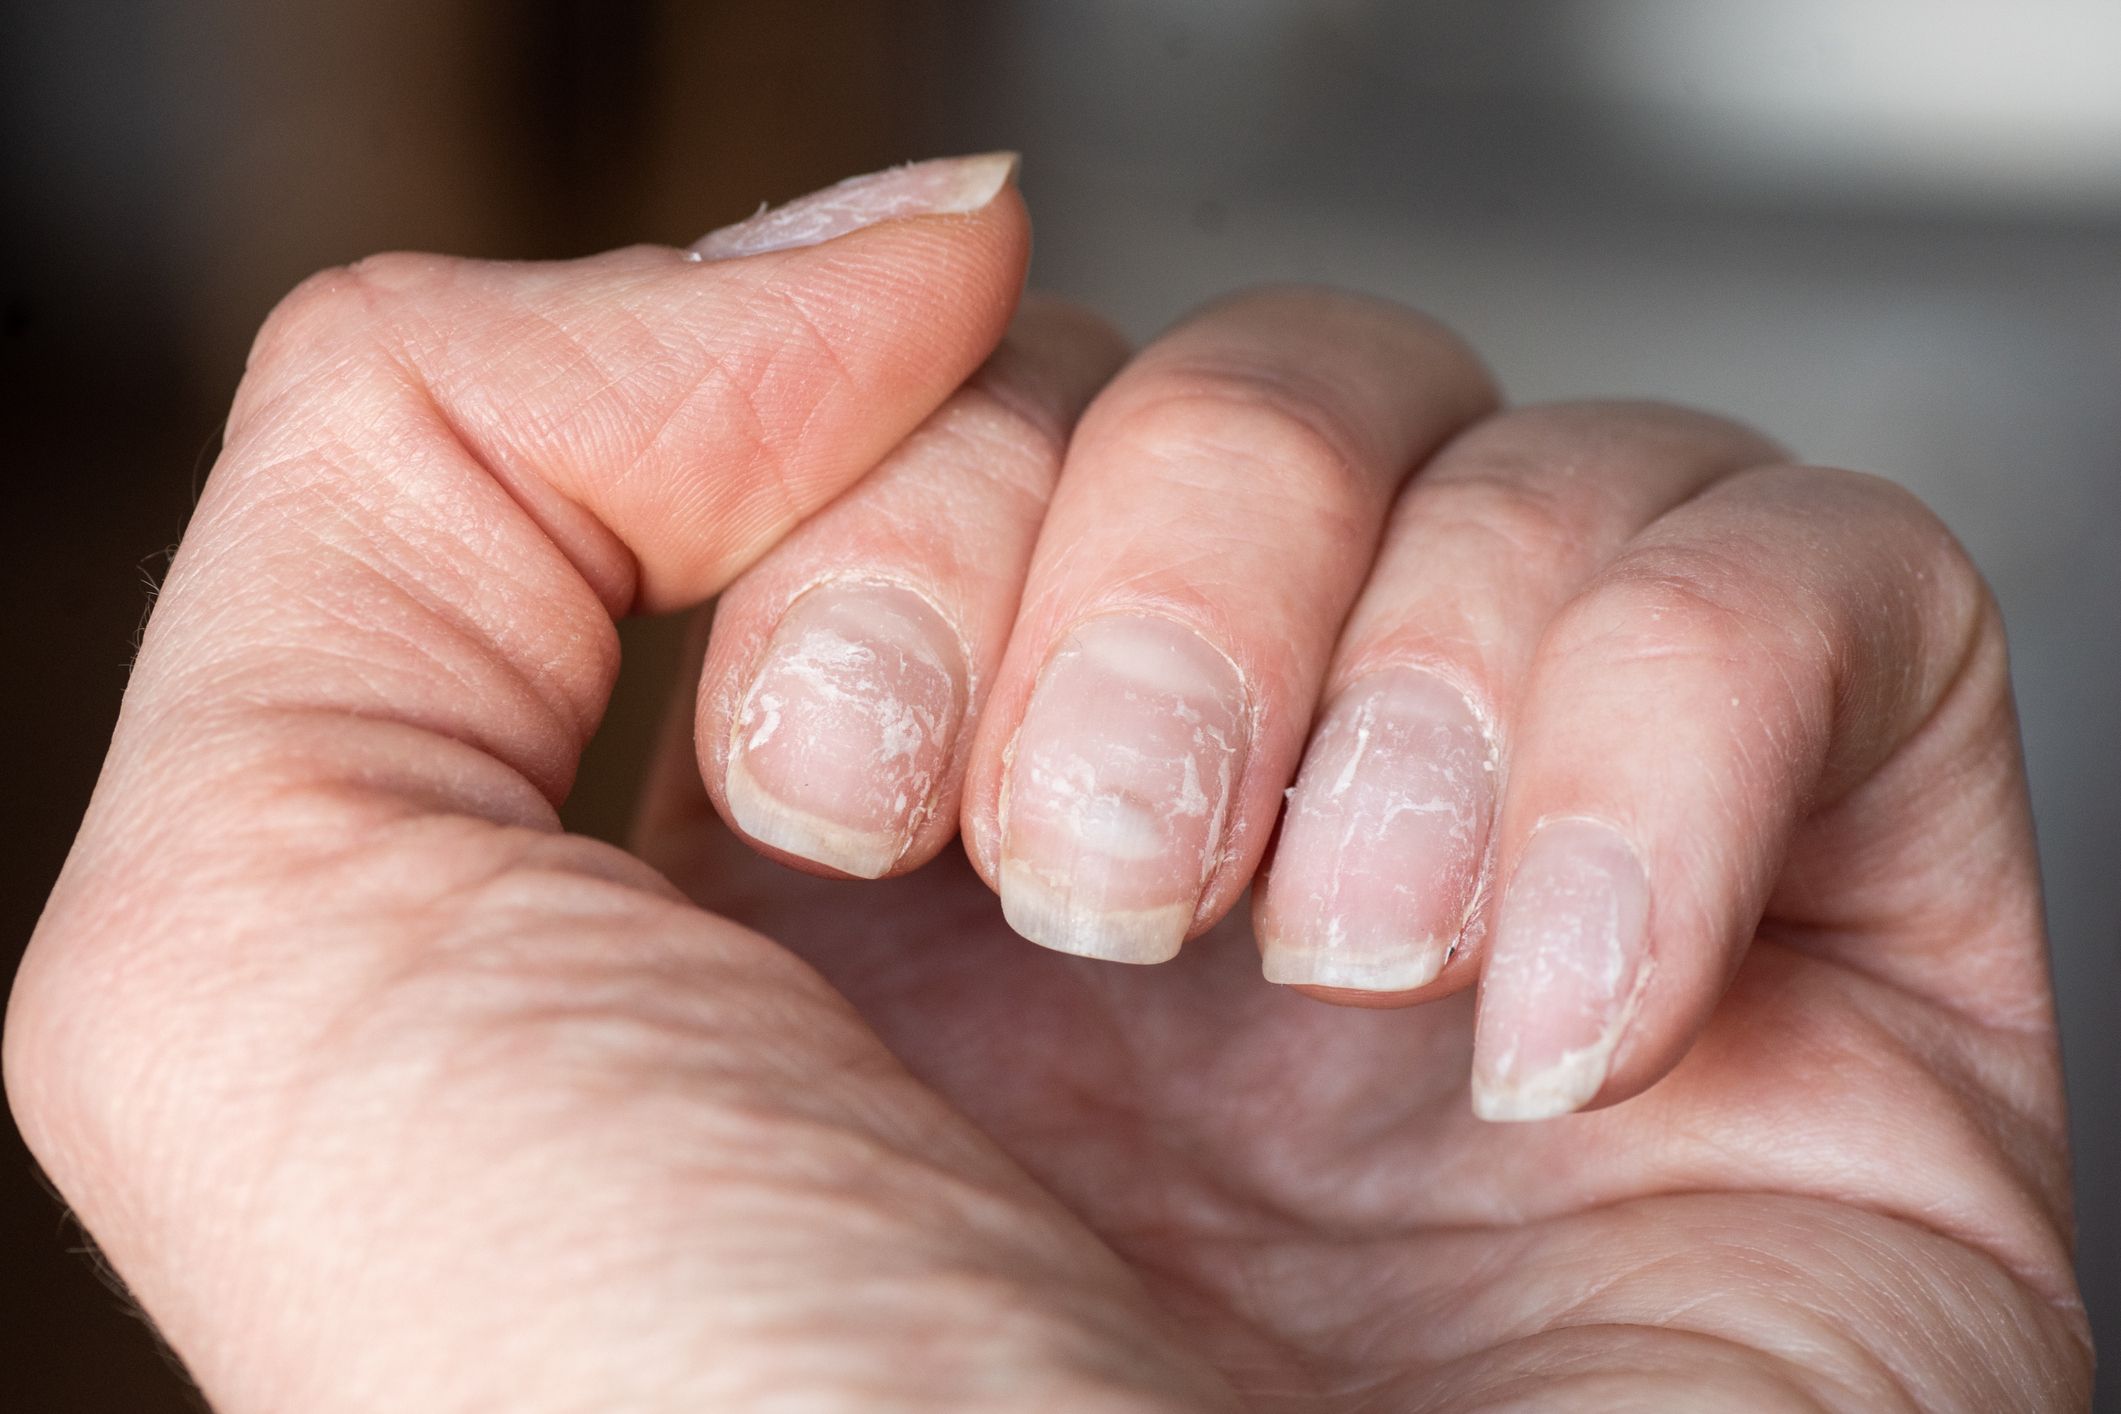 Is Nail Polish Remover Bad For Your Nails? — Acetone Nail Polish Remover